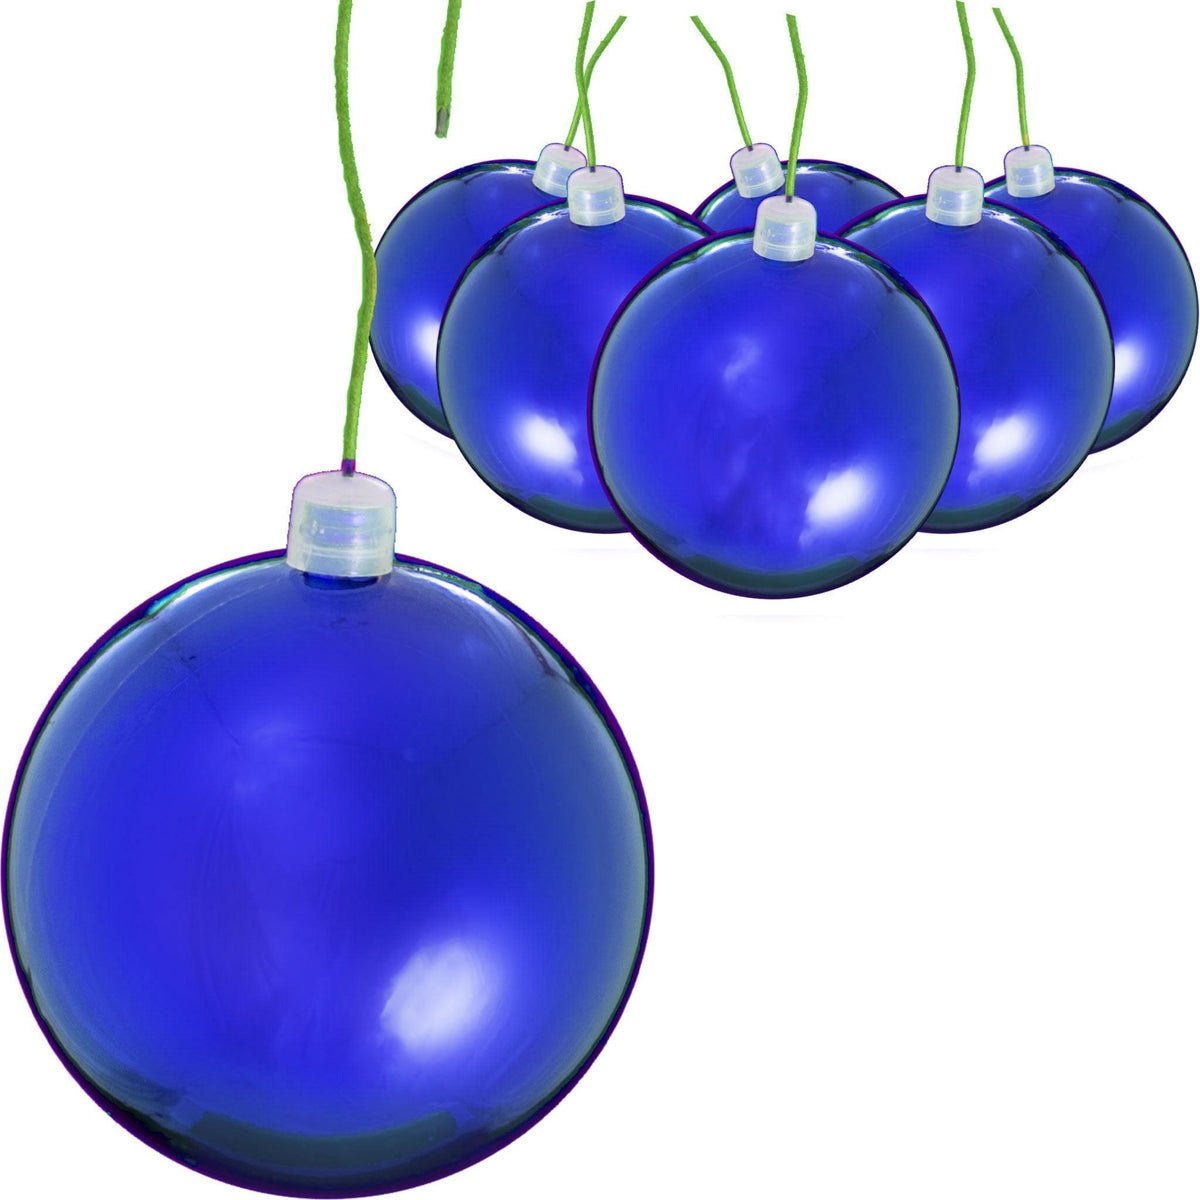 Lee Display offers brand new Shiny Blue Plastic Ball Ornaments at wholesale prices for affordable Christmas Tree Hanging and Holiday Decorating on sale at leedisplay.com